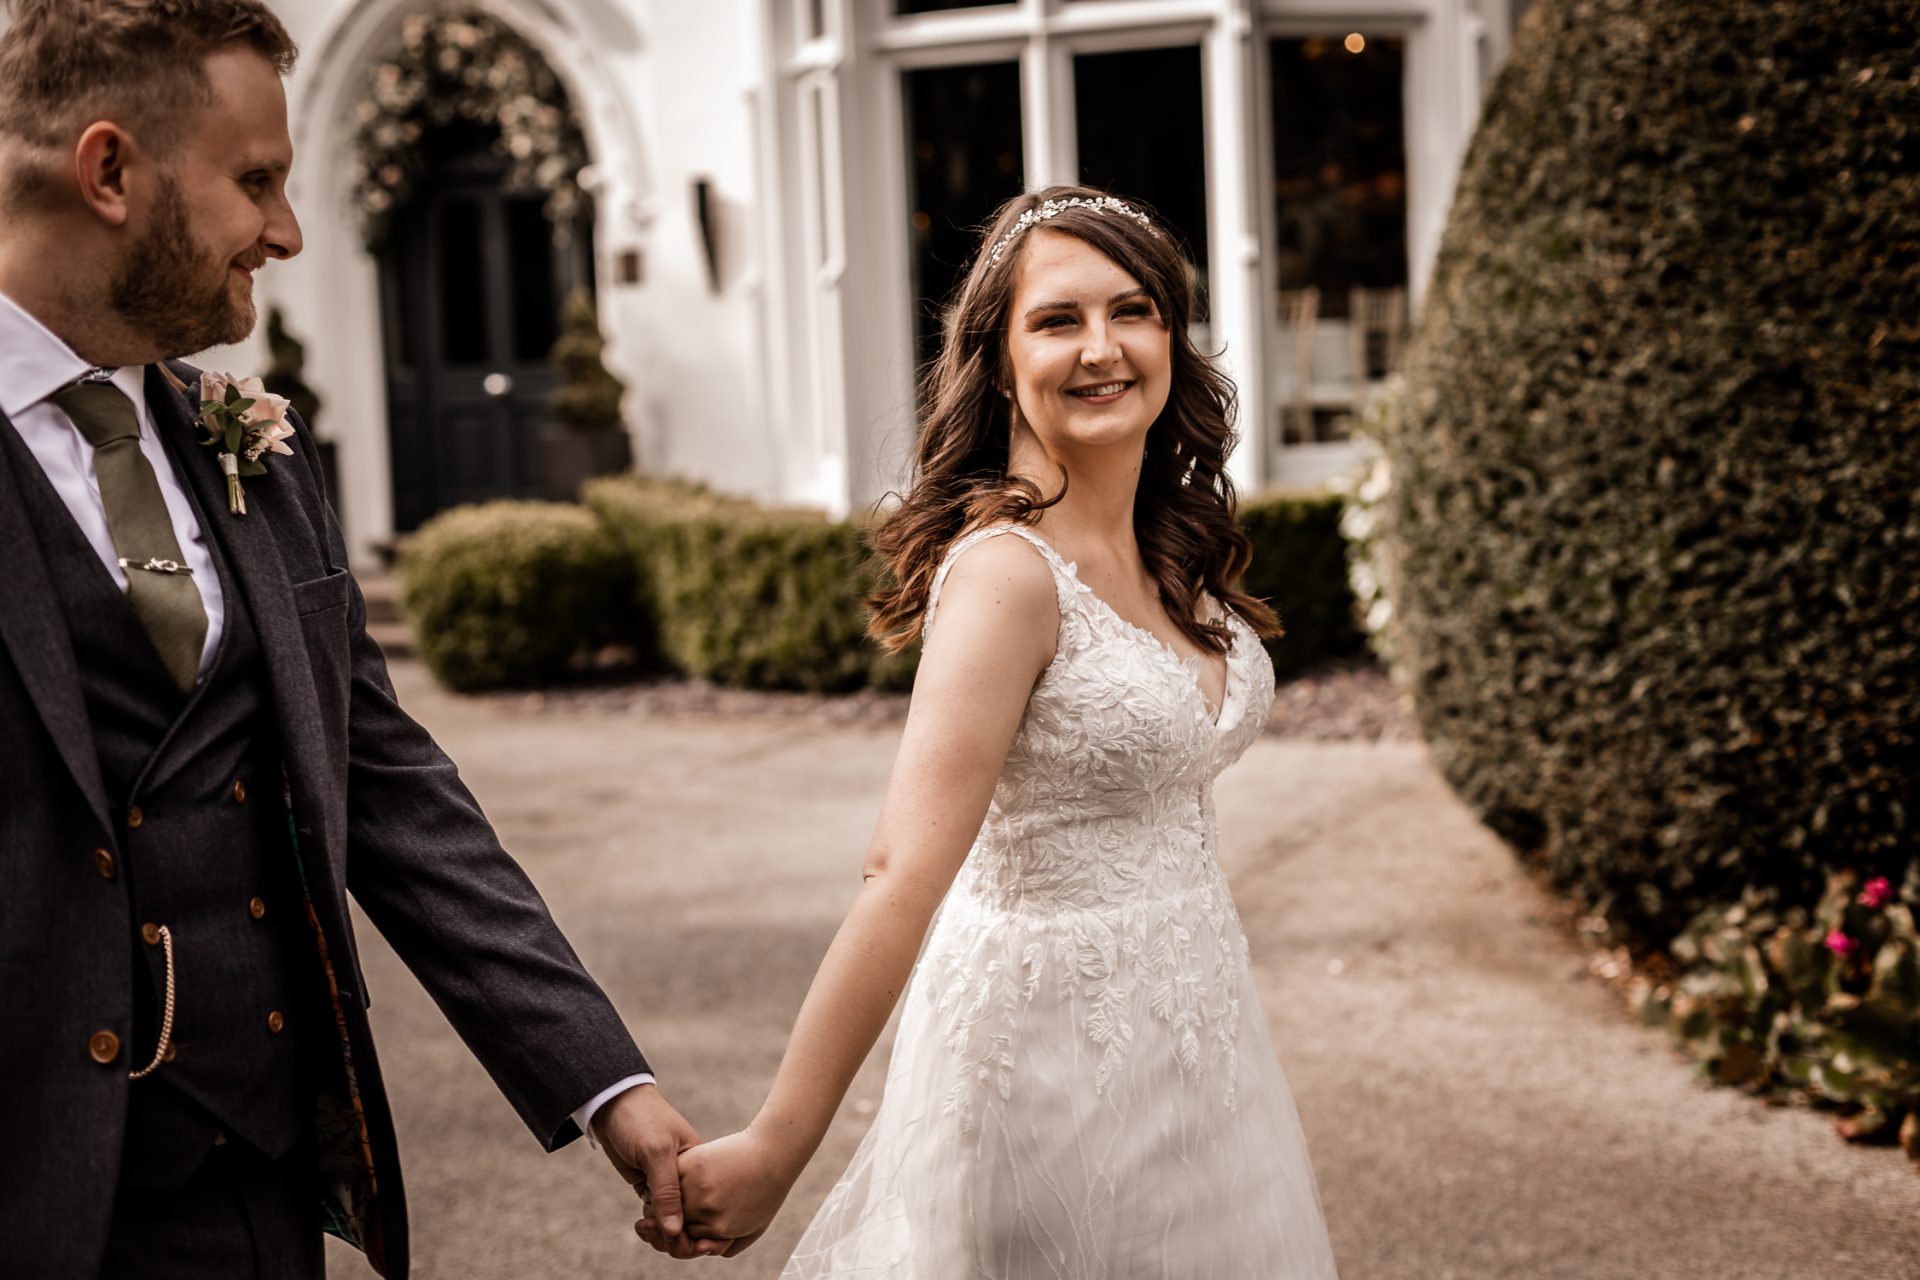 Newly married bride walks hand in hand with her new husband at The Didsbury Park Hotel, Manchester. Isabelle B Photography, Sheffield Wedding Photography